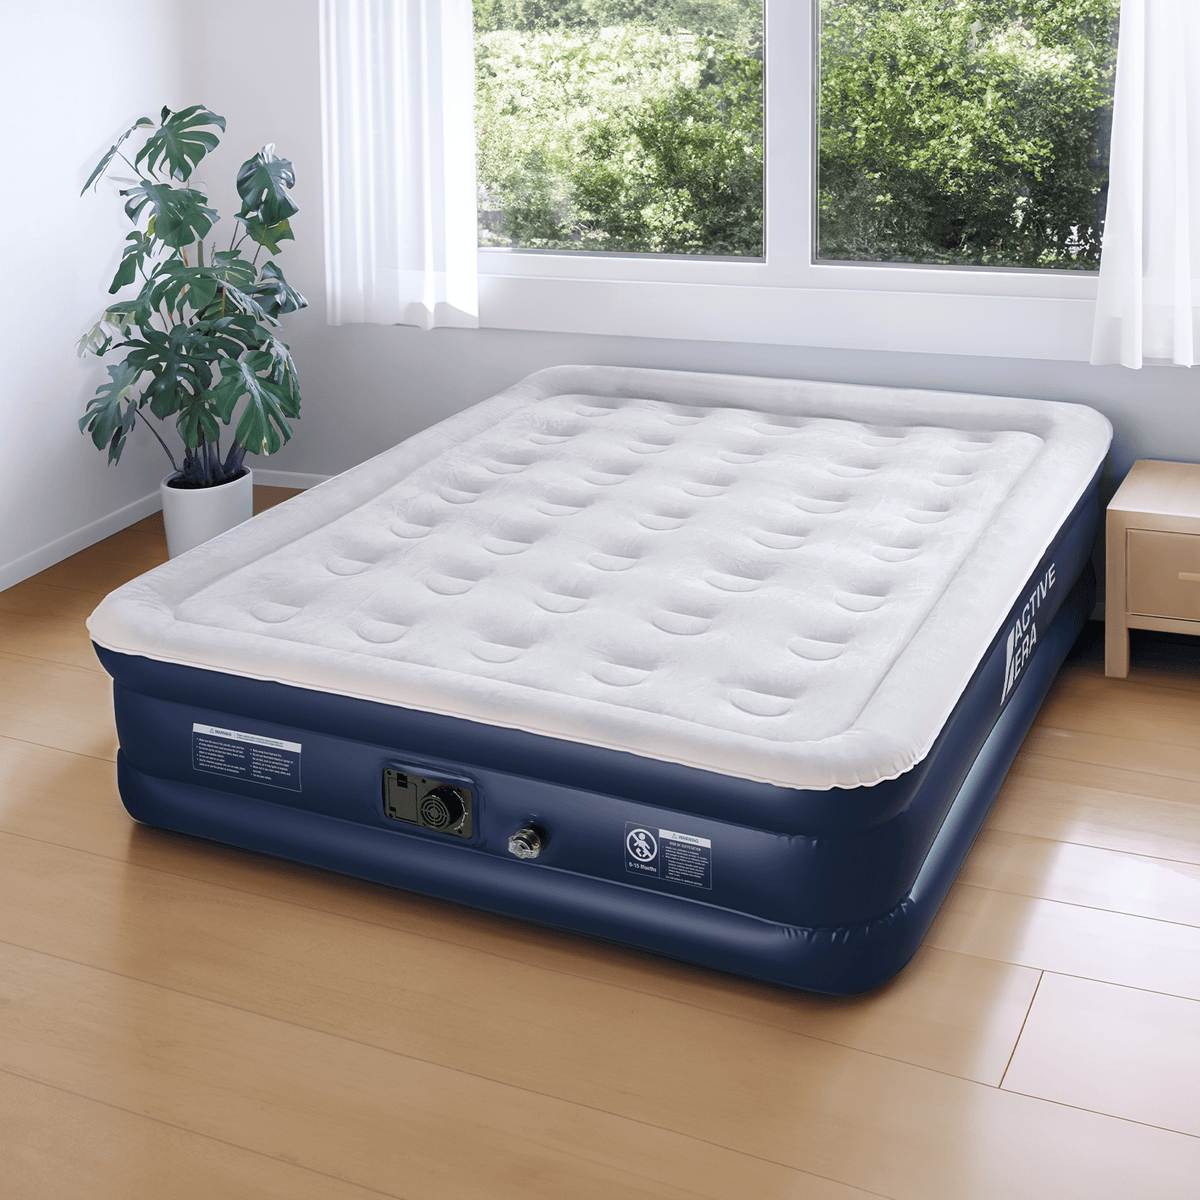 King Size Comfort Air Bed – Grey/Navy